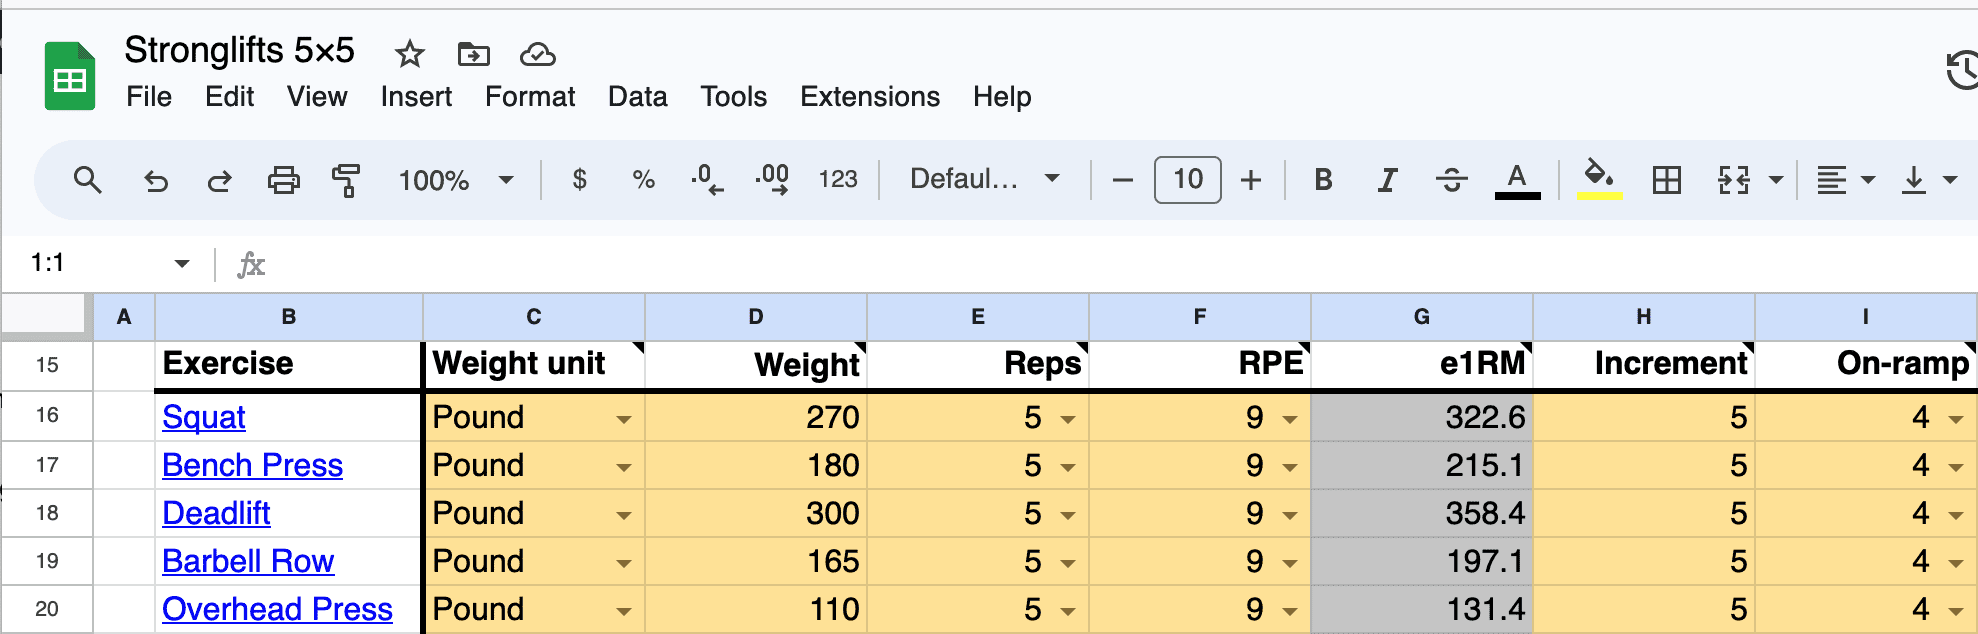 Stronglifts 5x5 spreadsheet on-ramp setting